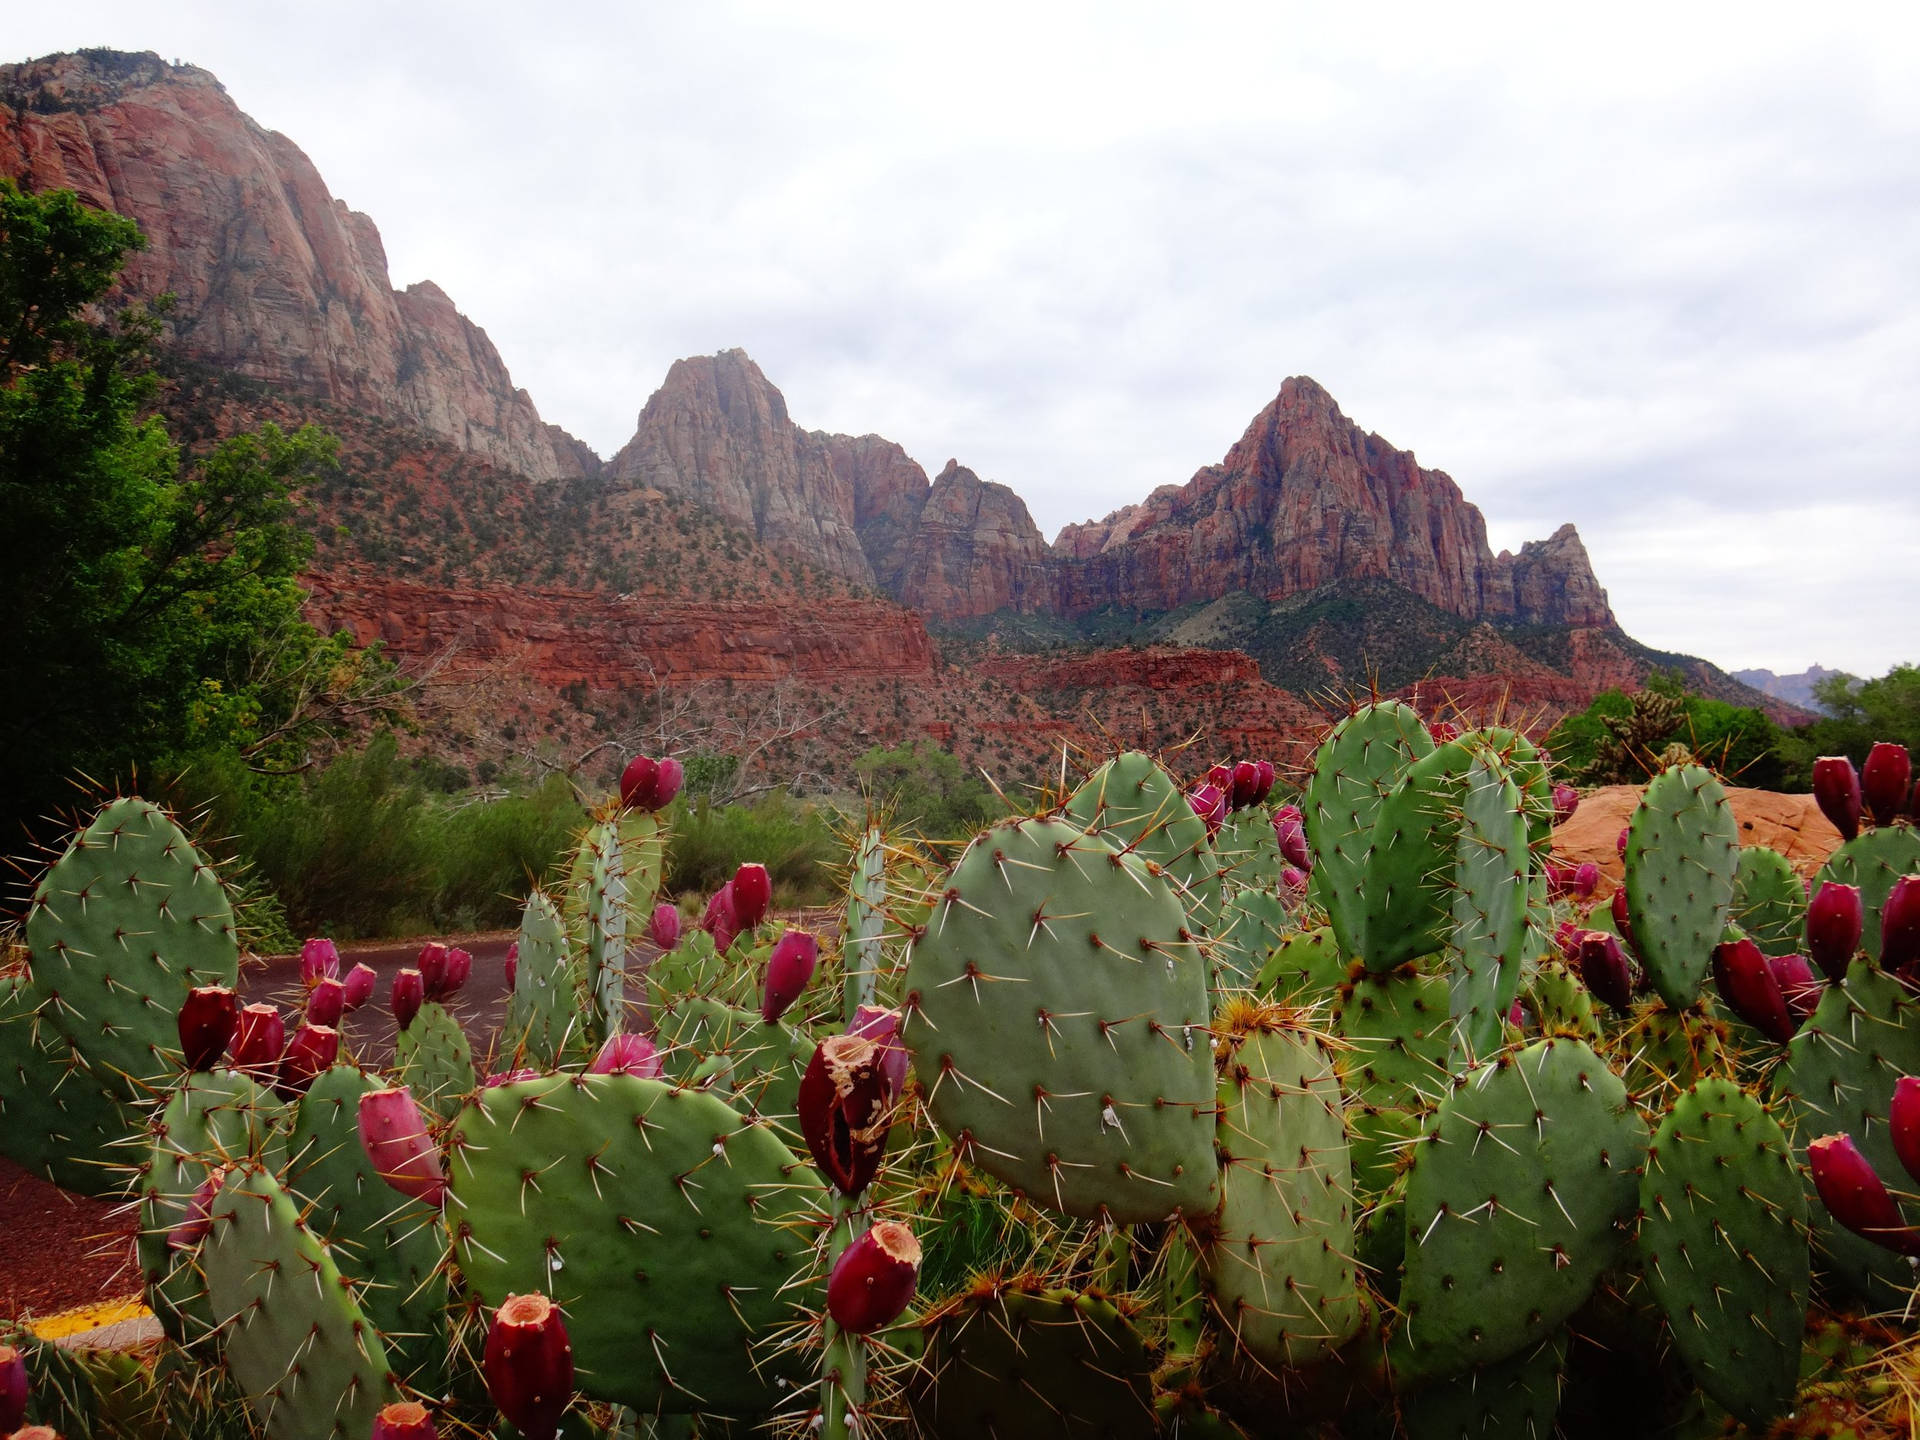 Prickly Pear At The Foot Of Mountains Wallpaper